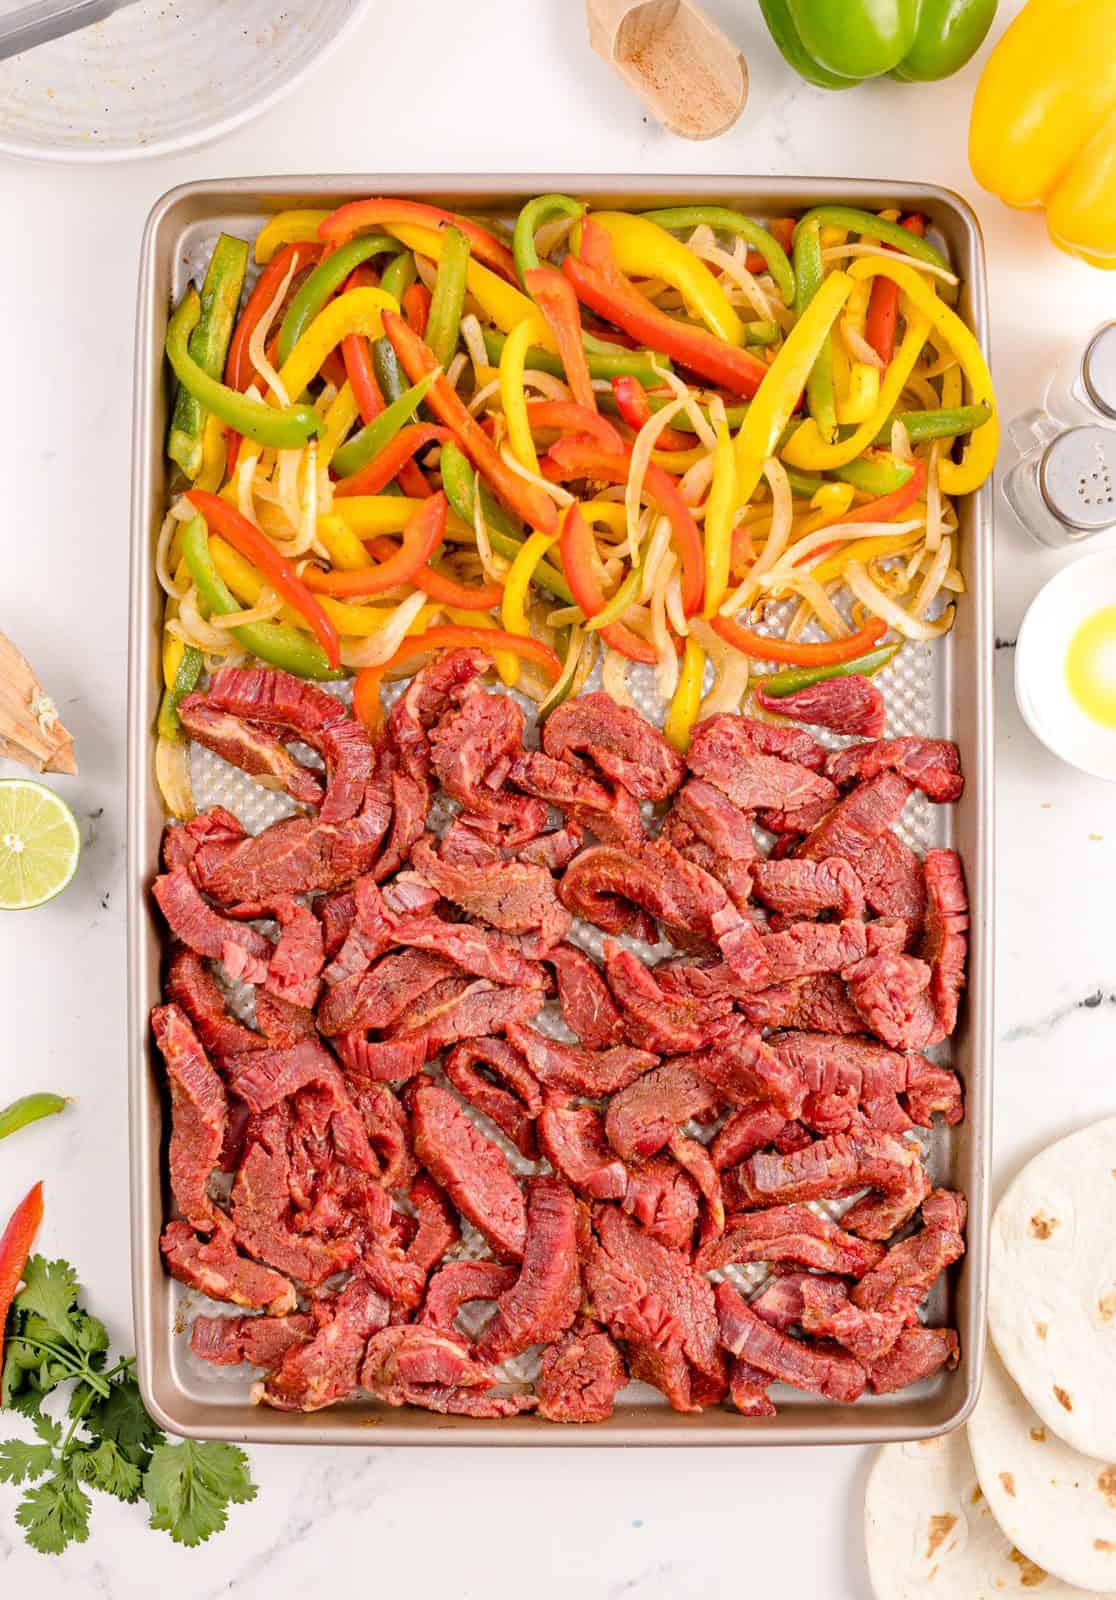 Beef added to sheet pan with vegetables.